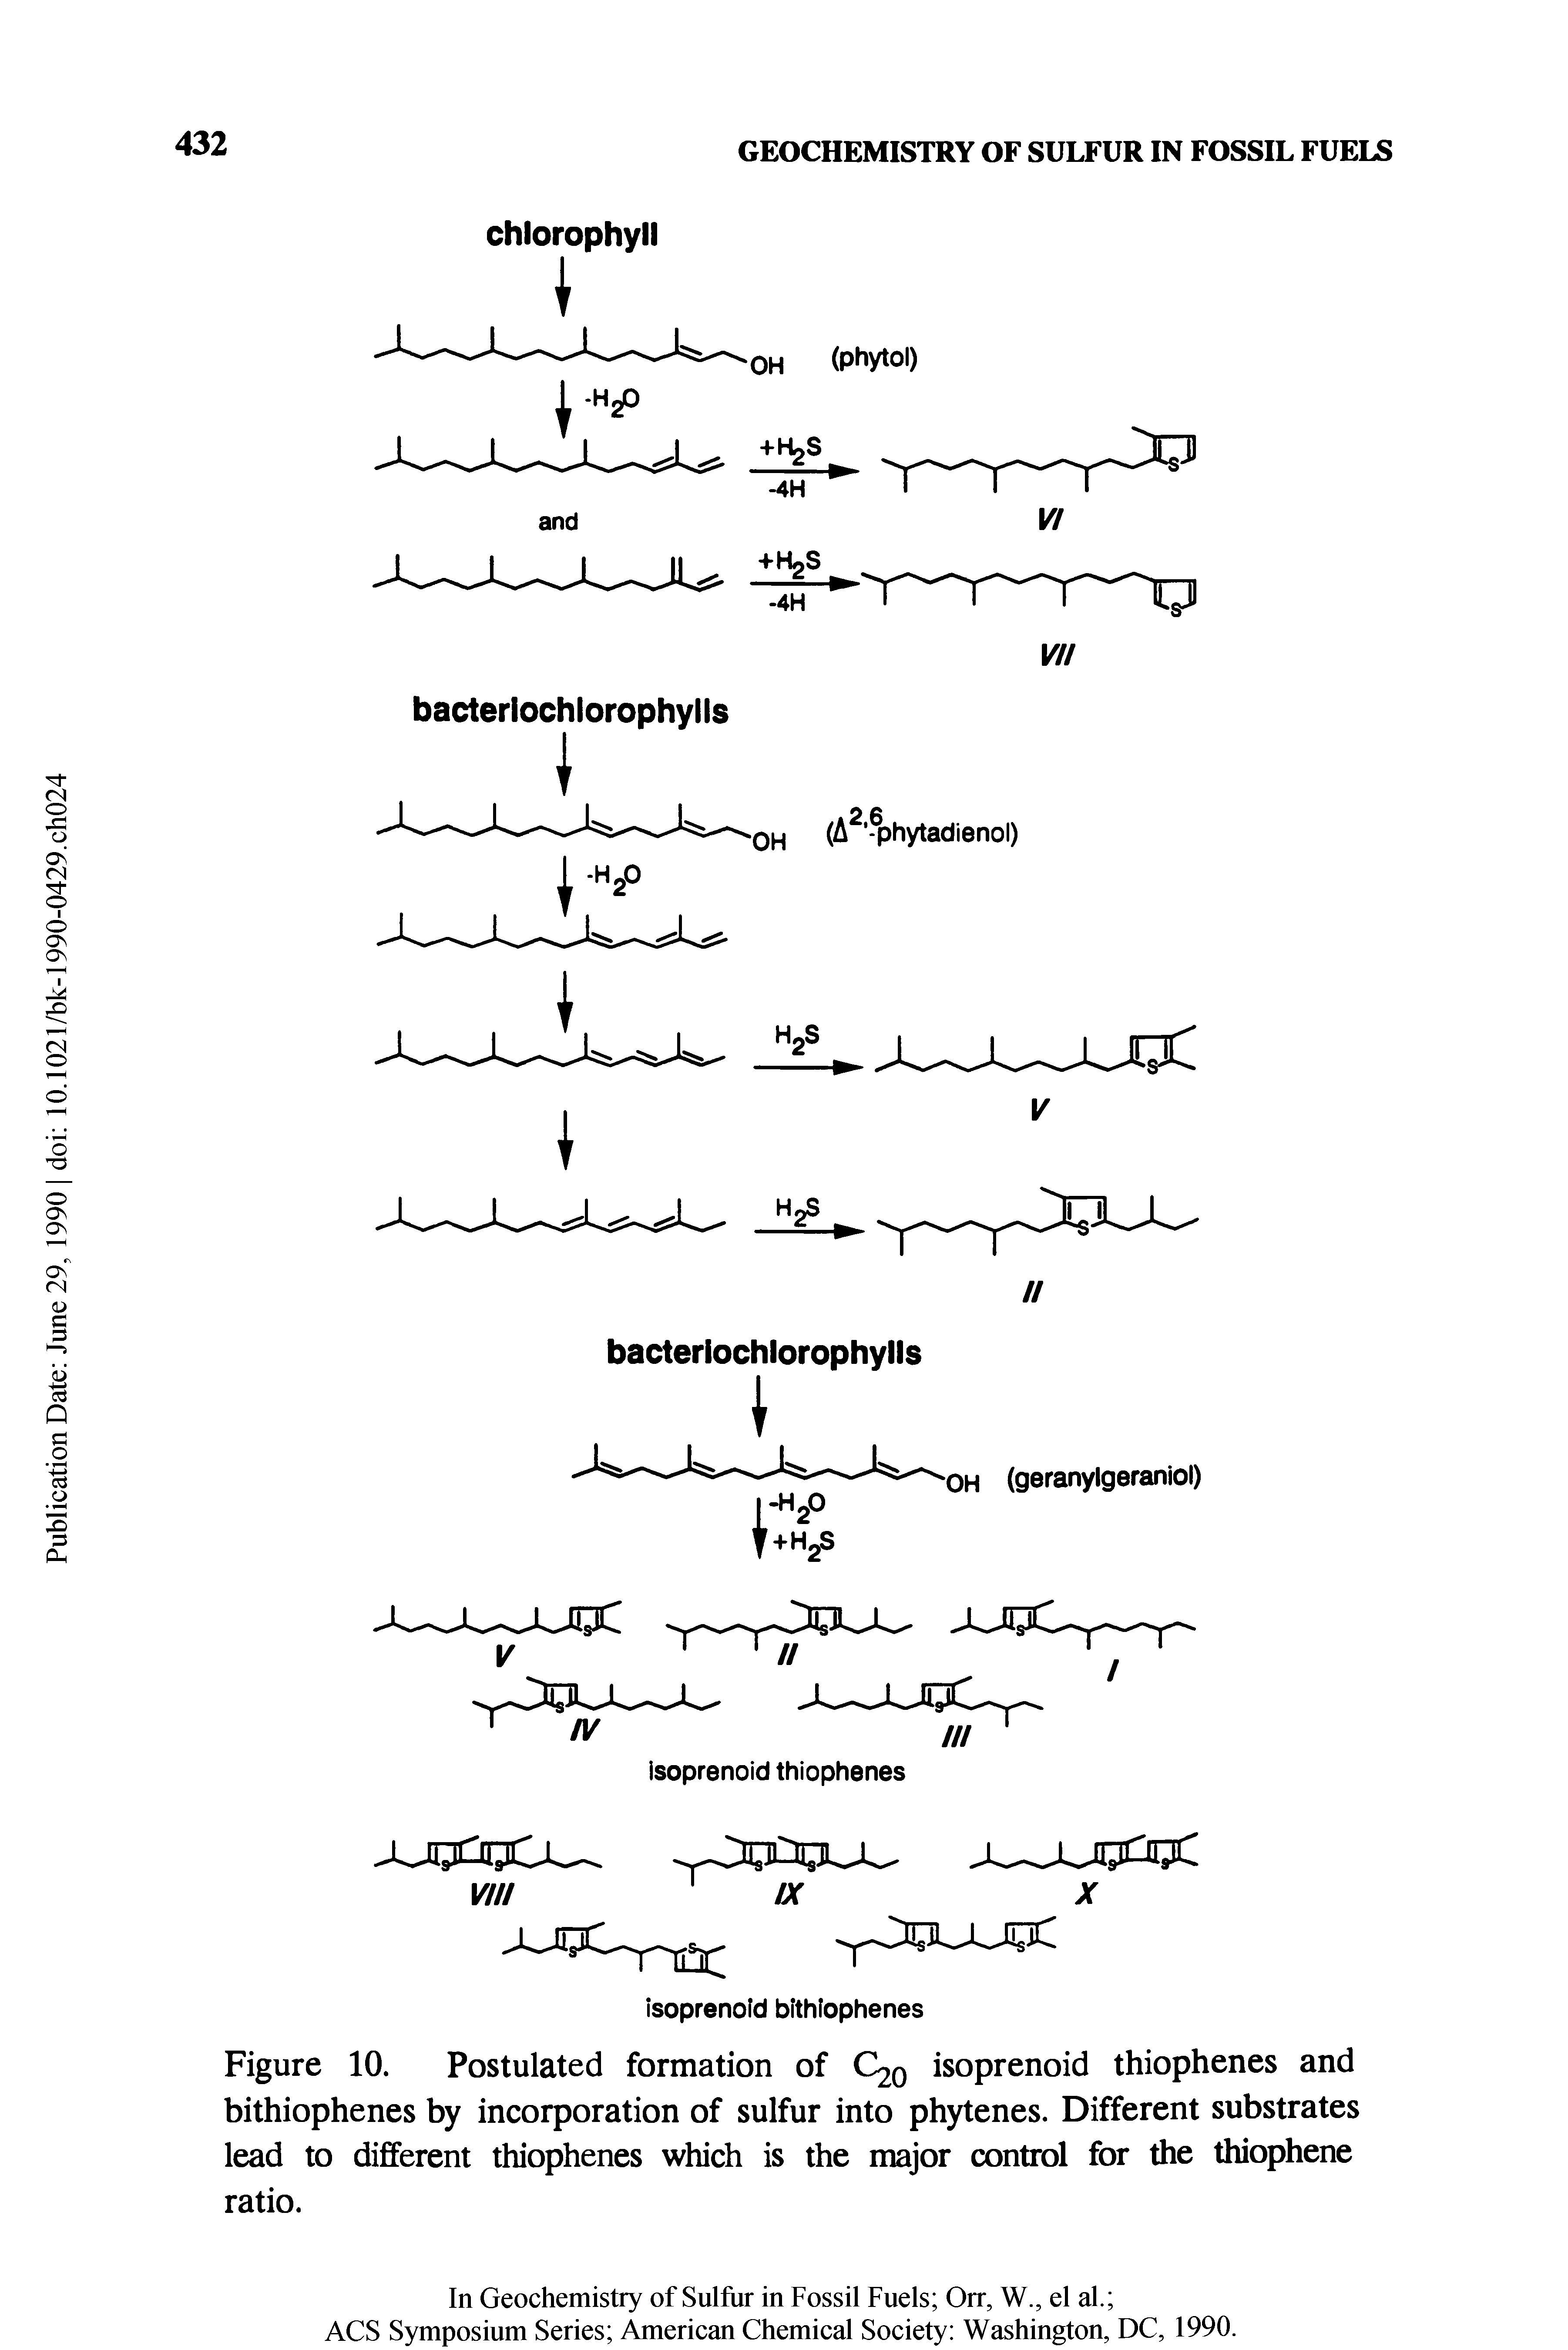 Figure 10. Postulated formation of C20 isoprenoid thiophenes and bithiophenes by incorporation of sulfur into phytenes. Different substrates lead to different thiophenes which is the major control for the thiophene ratio.